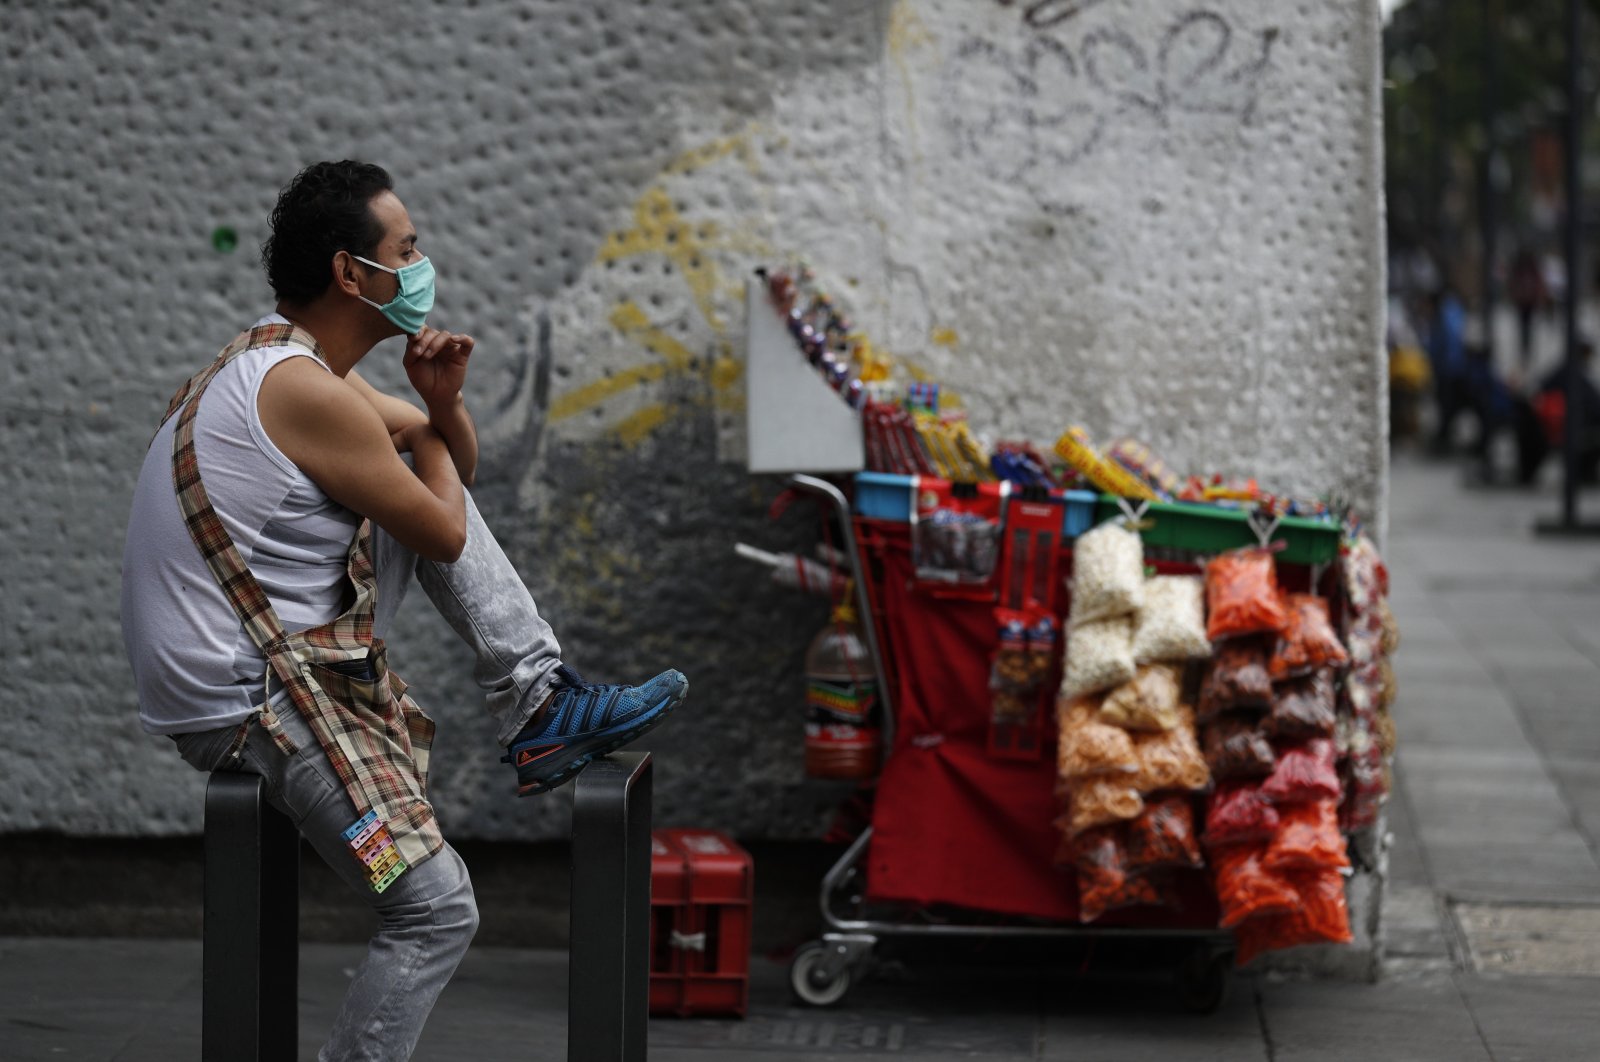 A snack vendor wears a mask as he waits for customers by his cart, in central Mexico City, Mexico, May 31, 2020. (AP Photo)